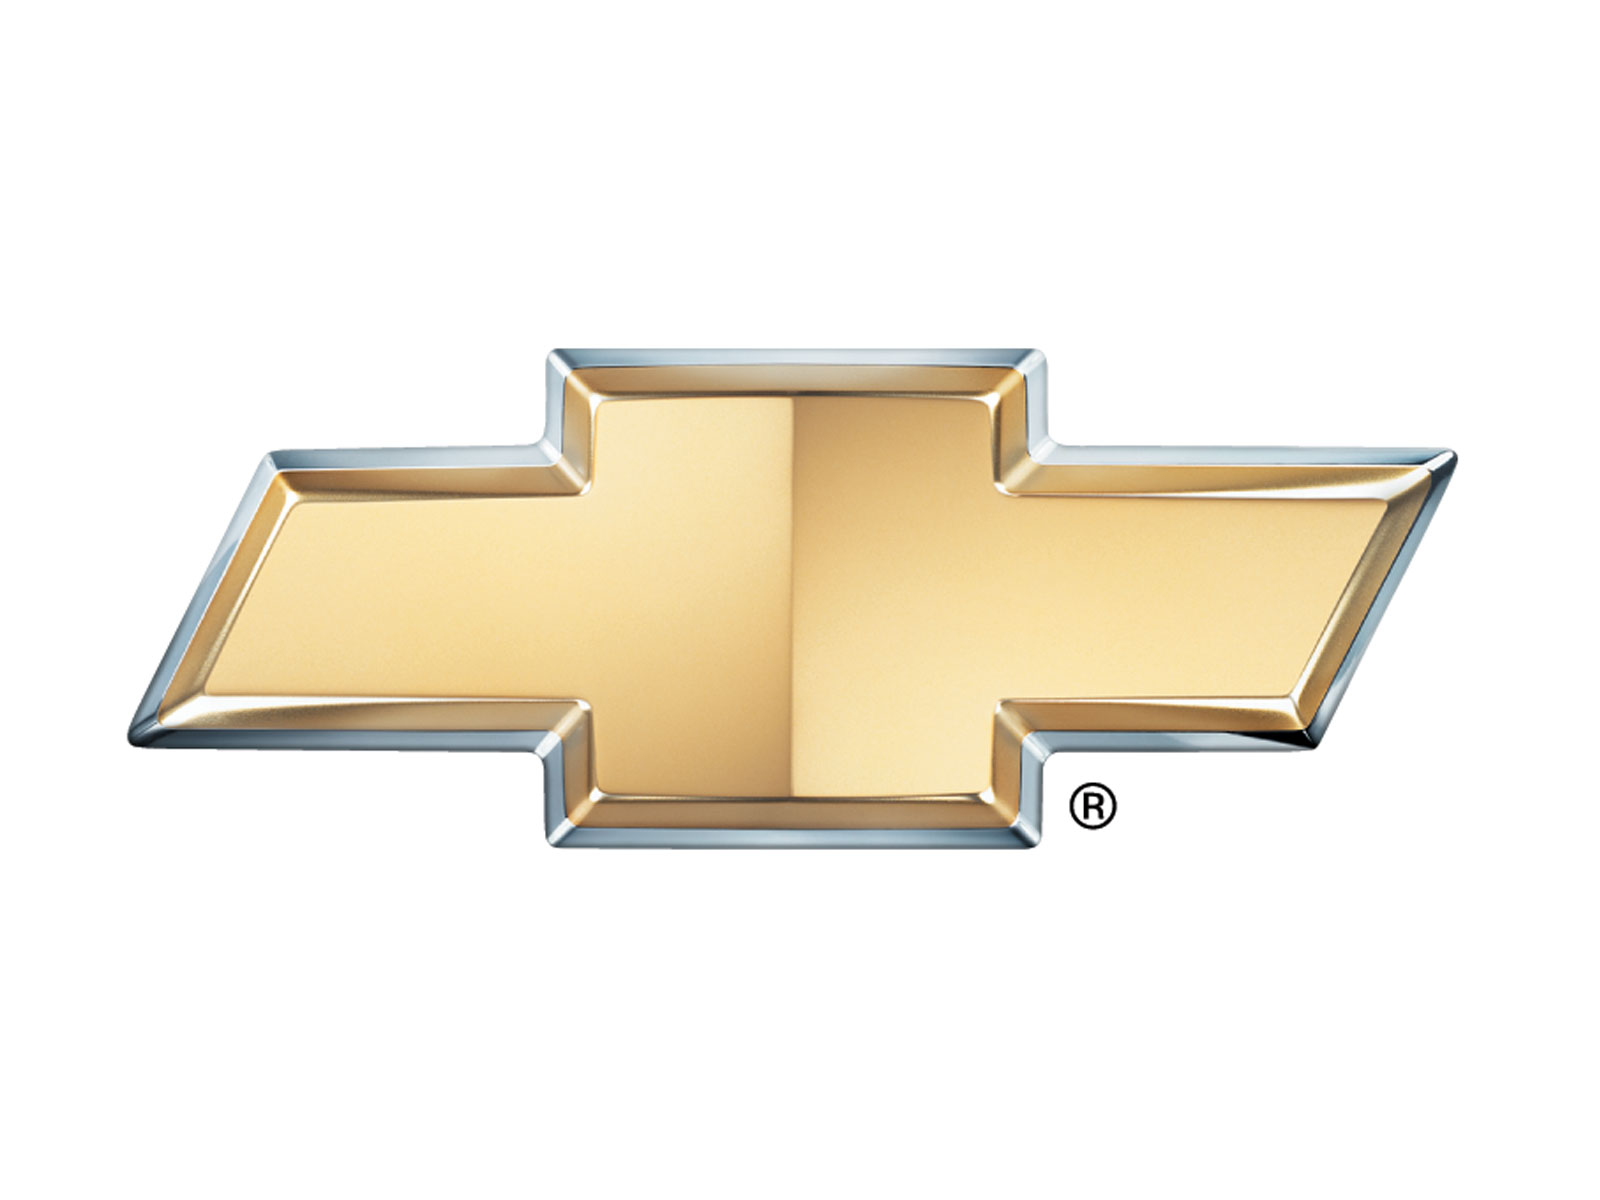 Chevy Bow Tie Clip Art Pictures